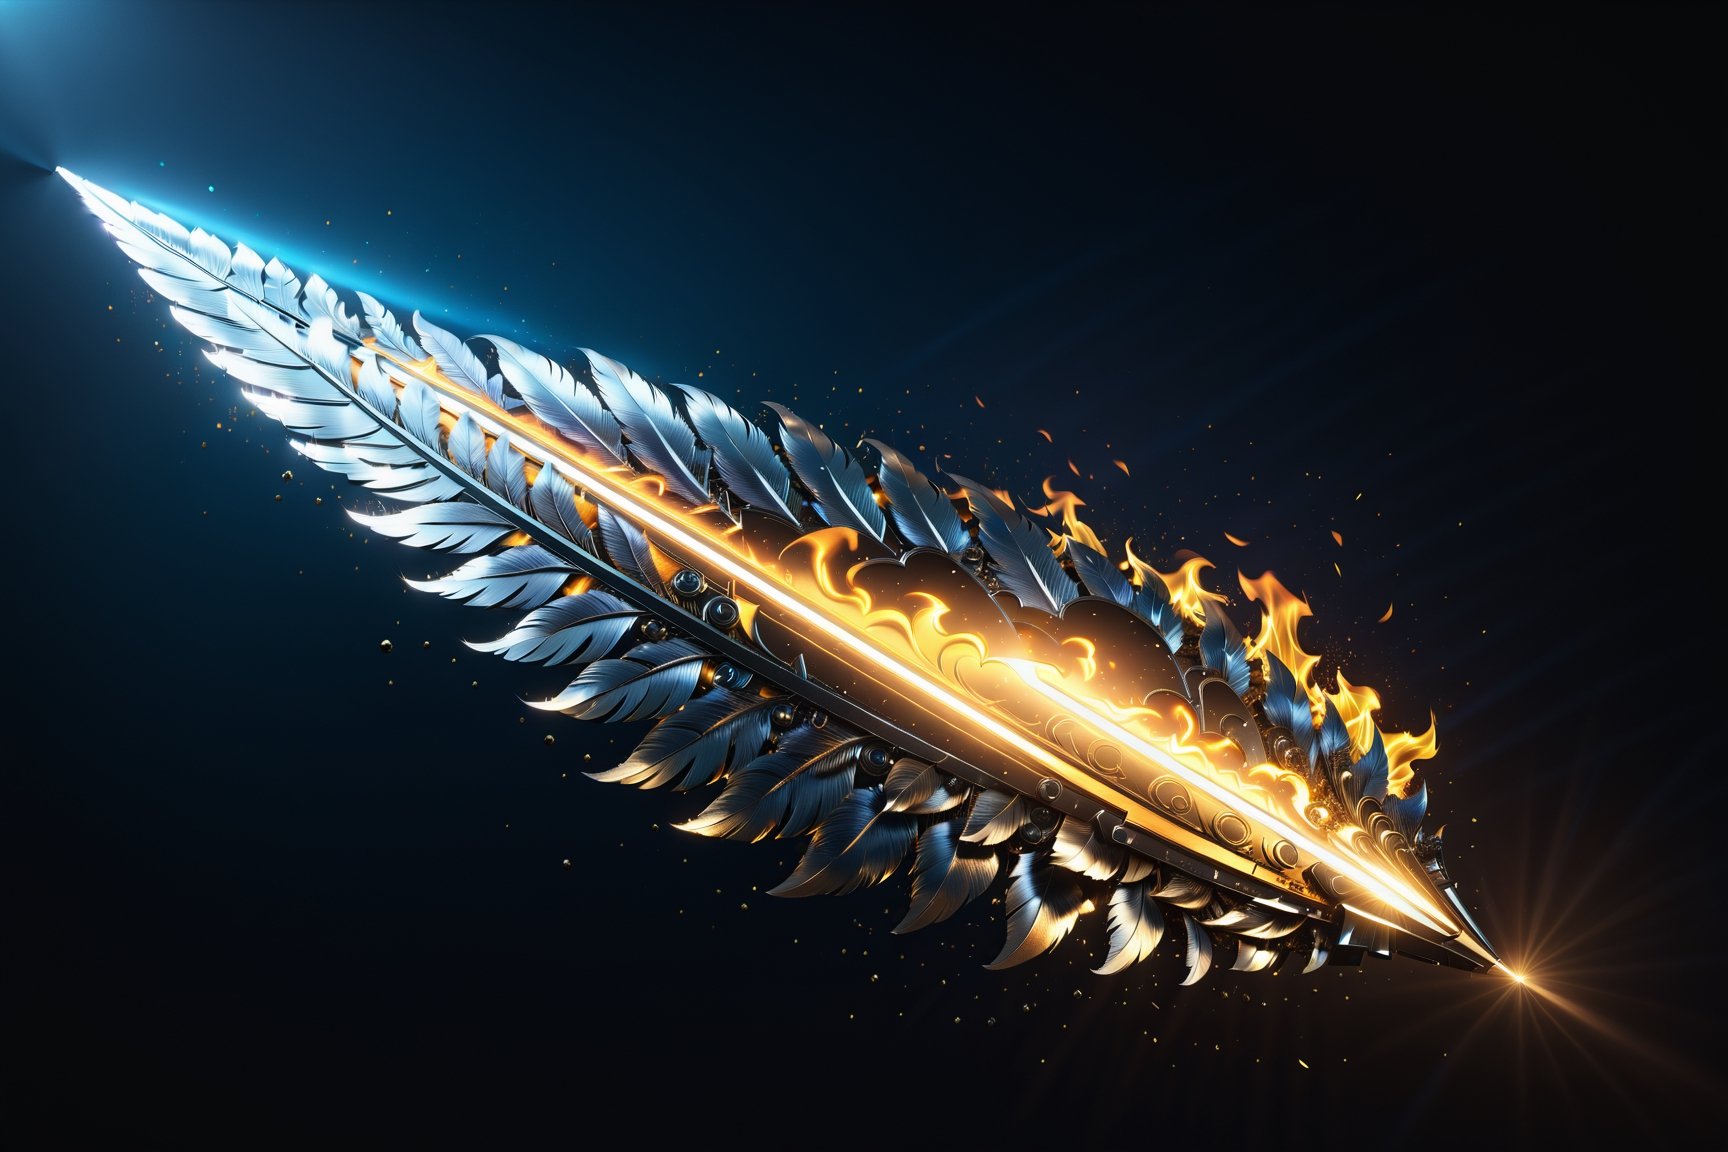 (best quality,  highres,  ultra high resolution,  masterpiece,  realistic,  extremely photograph,  detailed photo,  8K wallpaper,  intricate detail,  film grains), High definition photorealistic, luxurious hyperrealistic poster composition fire and smoke particles simetric holographic foil crystal of a luxury shield with wing, feathers art deco, gothic black and silver iridicente efect Unreal Engine, by Weta Digital, by Wêtà FX, by WLOP, cinematics, color grading, editorial photography, photography, photo shoot , shot in 70mm, Ultra - Wide Angle, Depth of Field, DOF, Tilt Blur, Shutter Speed 1/ 1000, F/ 22, Gamma, White Balance, Neon, Light, Dark, Light Mode, Dark Mode, High Contrast, 5D, Multiverse, 32k, Super - Resolution, Megapixels, ProPhoto RGB, VR, Lonely, Good, Massive, Big, Spotlight, Frontlight, Halfear Lighting, Backlight, Rim Lights, Rim Lighting, Artificial Lighting, Natural Lighting, Incandescent , Optical Fiber, Moody Lighting, Cinematic Lighting, Studio Lighting, soft lighting, hard lighting, volumetric light, volumetric lighting, volumetric, contre - jour, Rembrandt lighting, split lighting, beautiful lighting, accent lighting, global lighting, lighting global lumens, screen space global illumination, ray tracing global illumination, Optics, Materiality, Ambient Occlusion, dispersion, bright, shadows, rough, shimmering, ray tracing reflections, lumen reflections, screen space reflections the screen, diffraction grading, chromatic aberration, GB shift, scan lines, ray tracing, ray tracing ambient occlusion, anti-aliasing, FXAA, TXAA, RTX, SSAO, Shaders, OpenGL - Shaders, GLSL - Shaders, Post processing , Post Production, Cel Shading, Tone Mapping, CGI, VFX, SFX, Hypermaximalist, Stylish, Hyperrealistic, Super Detailed, Photography, 8k